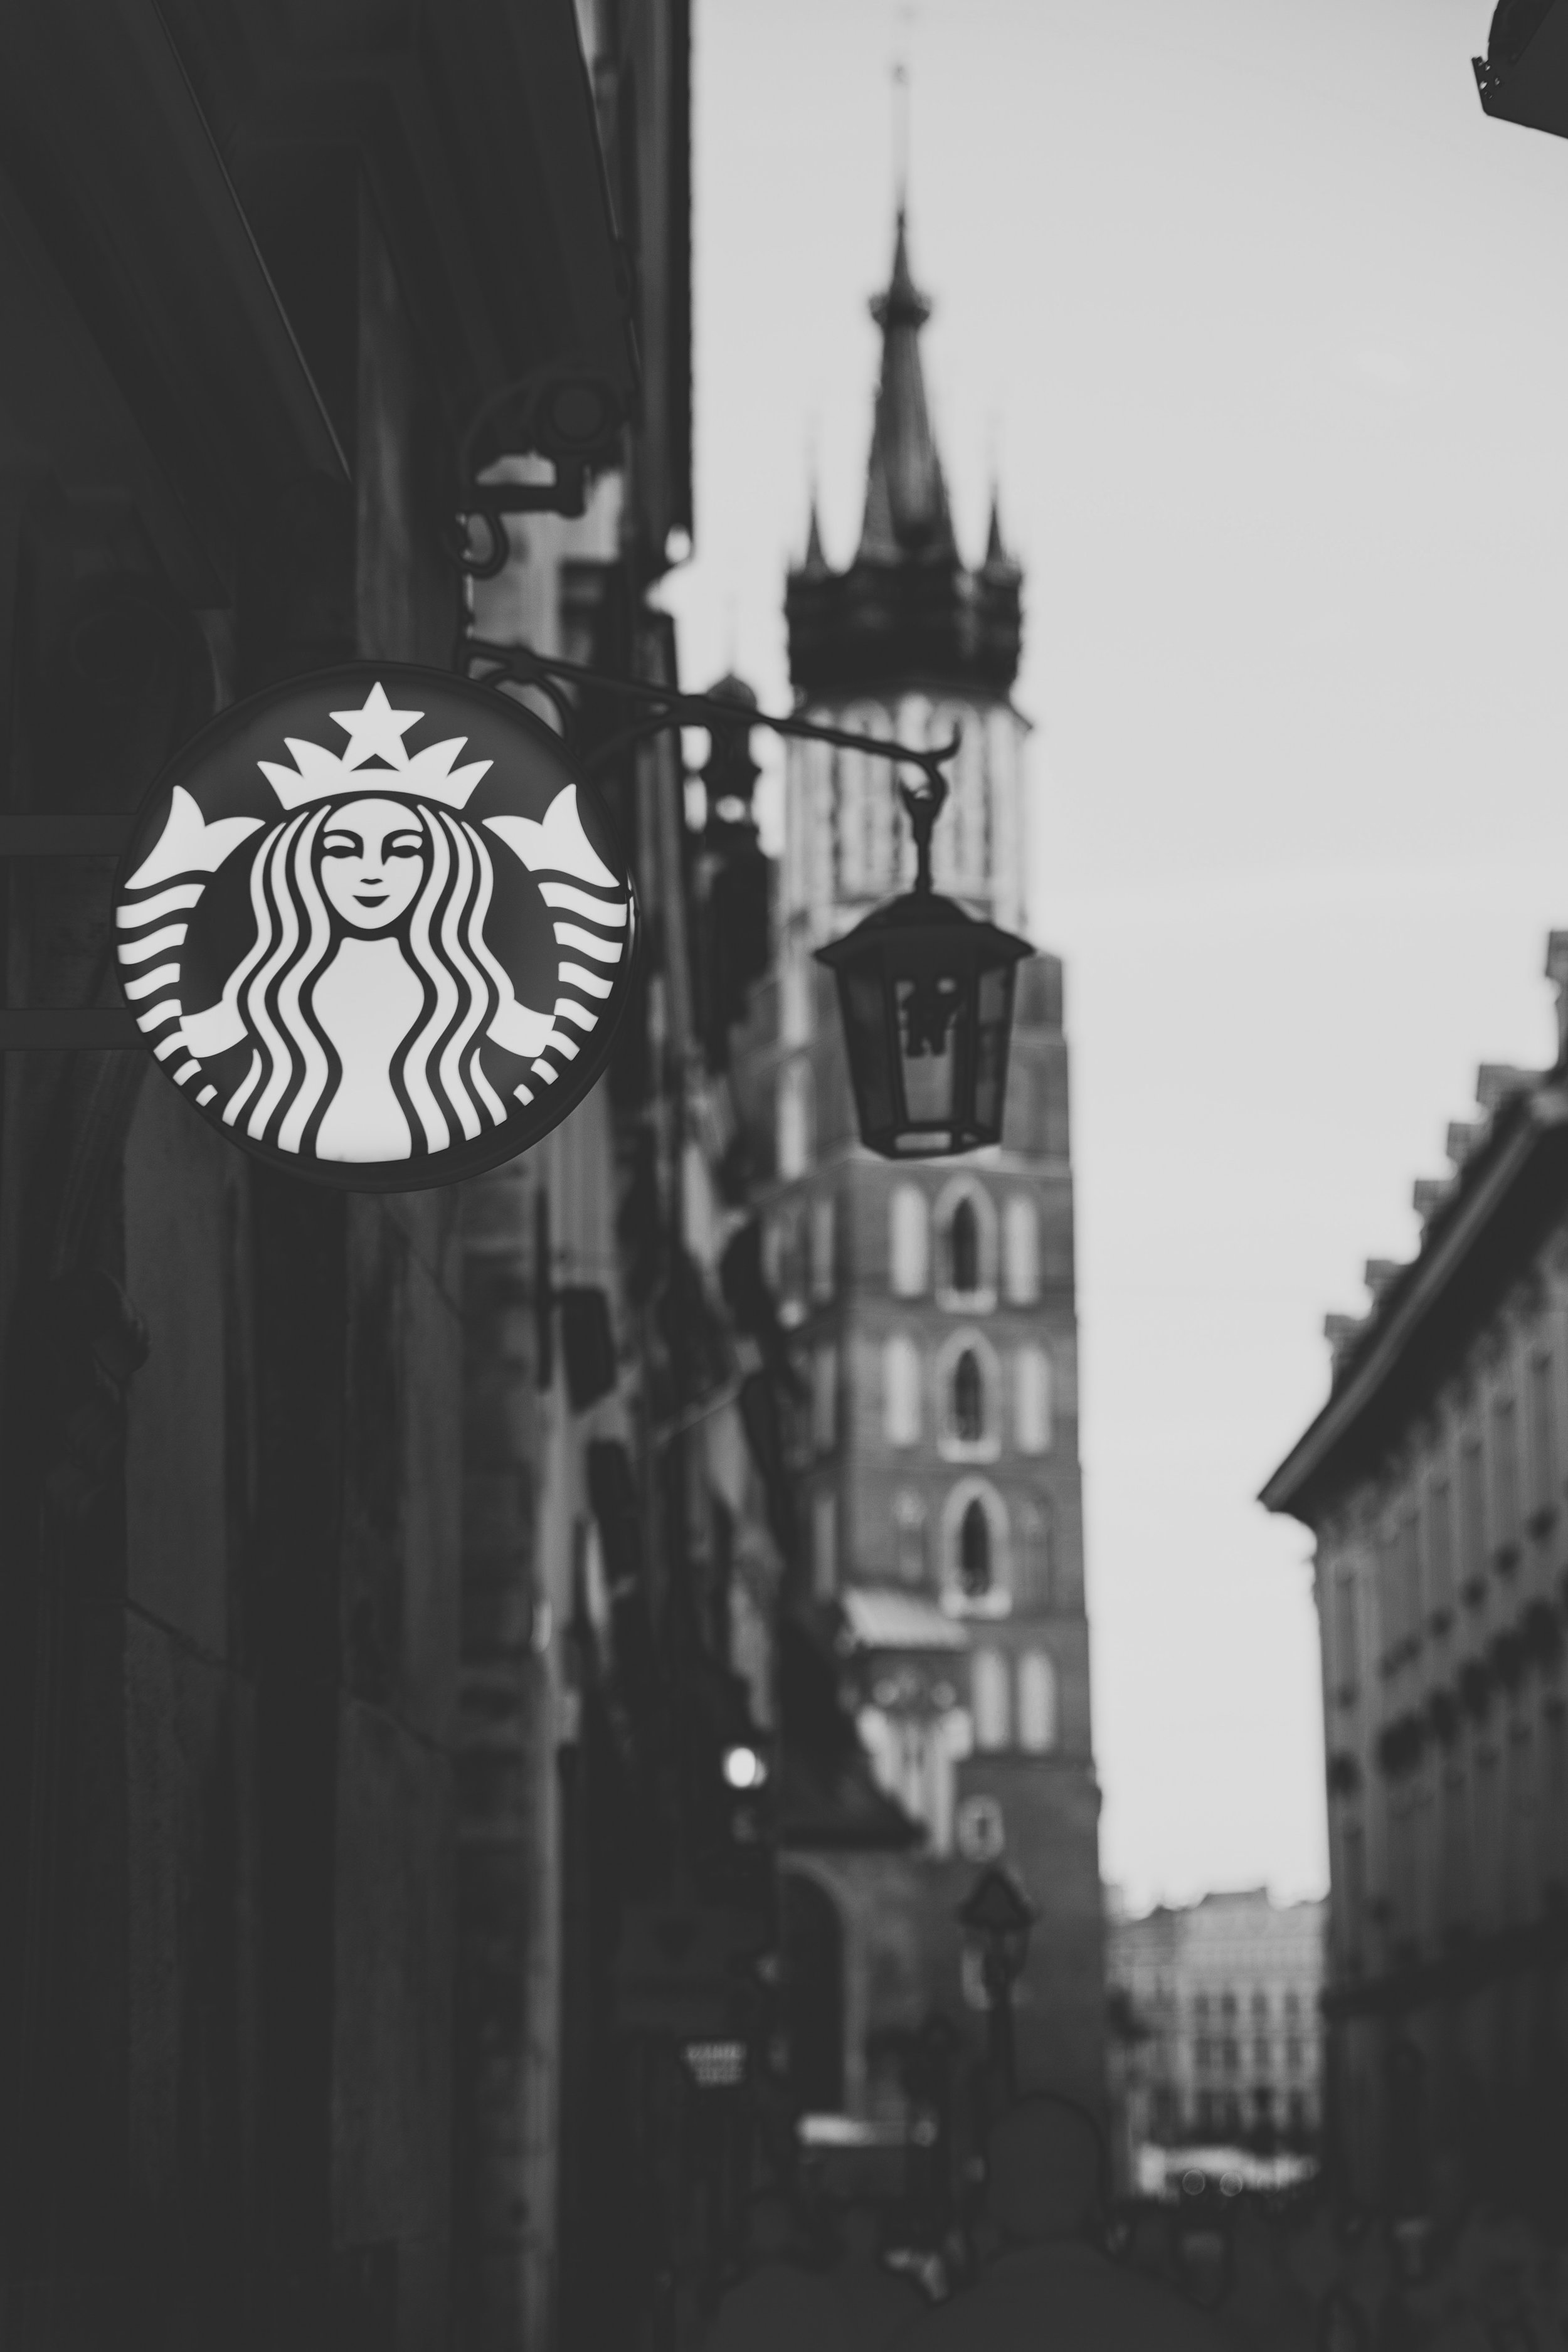 A Starbucks sign hangs in front of a city street